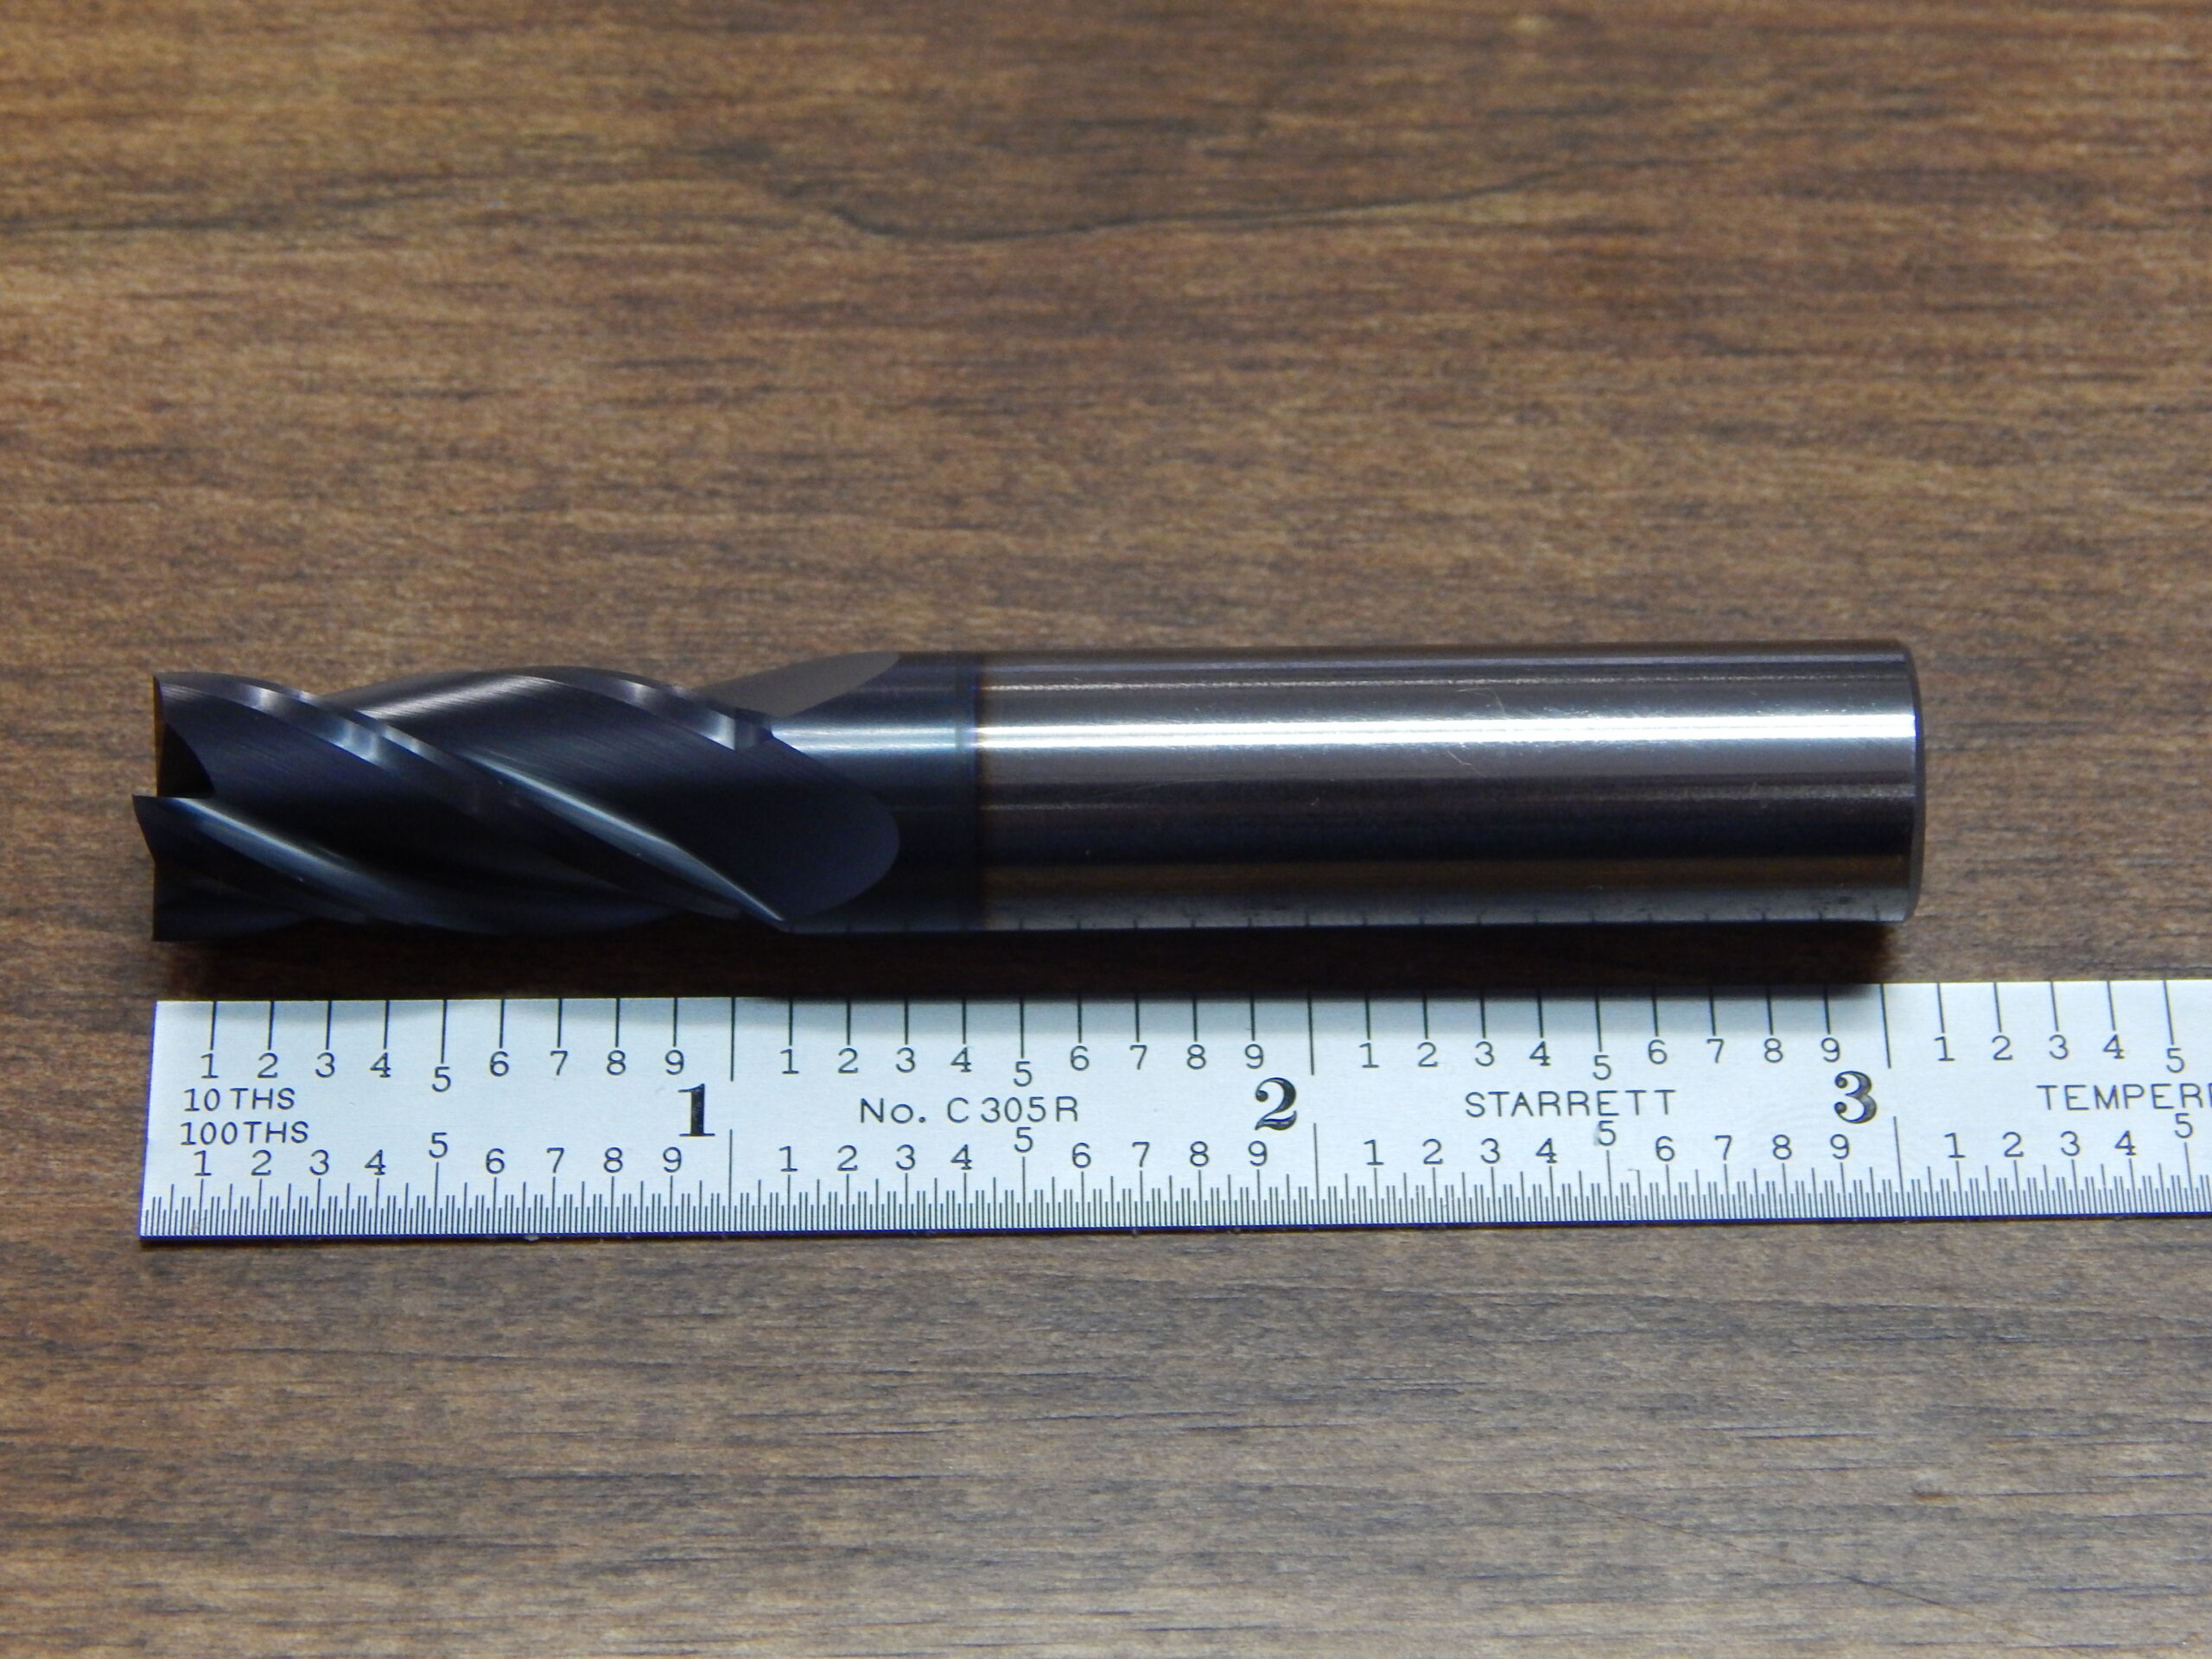 3/32" 4 FLUTE 142-0938-ALTIN COATED CARBIDE BALL END MILL !! 